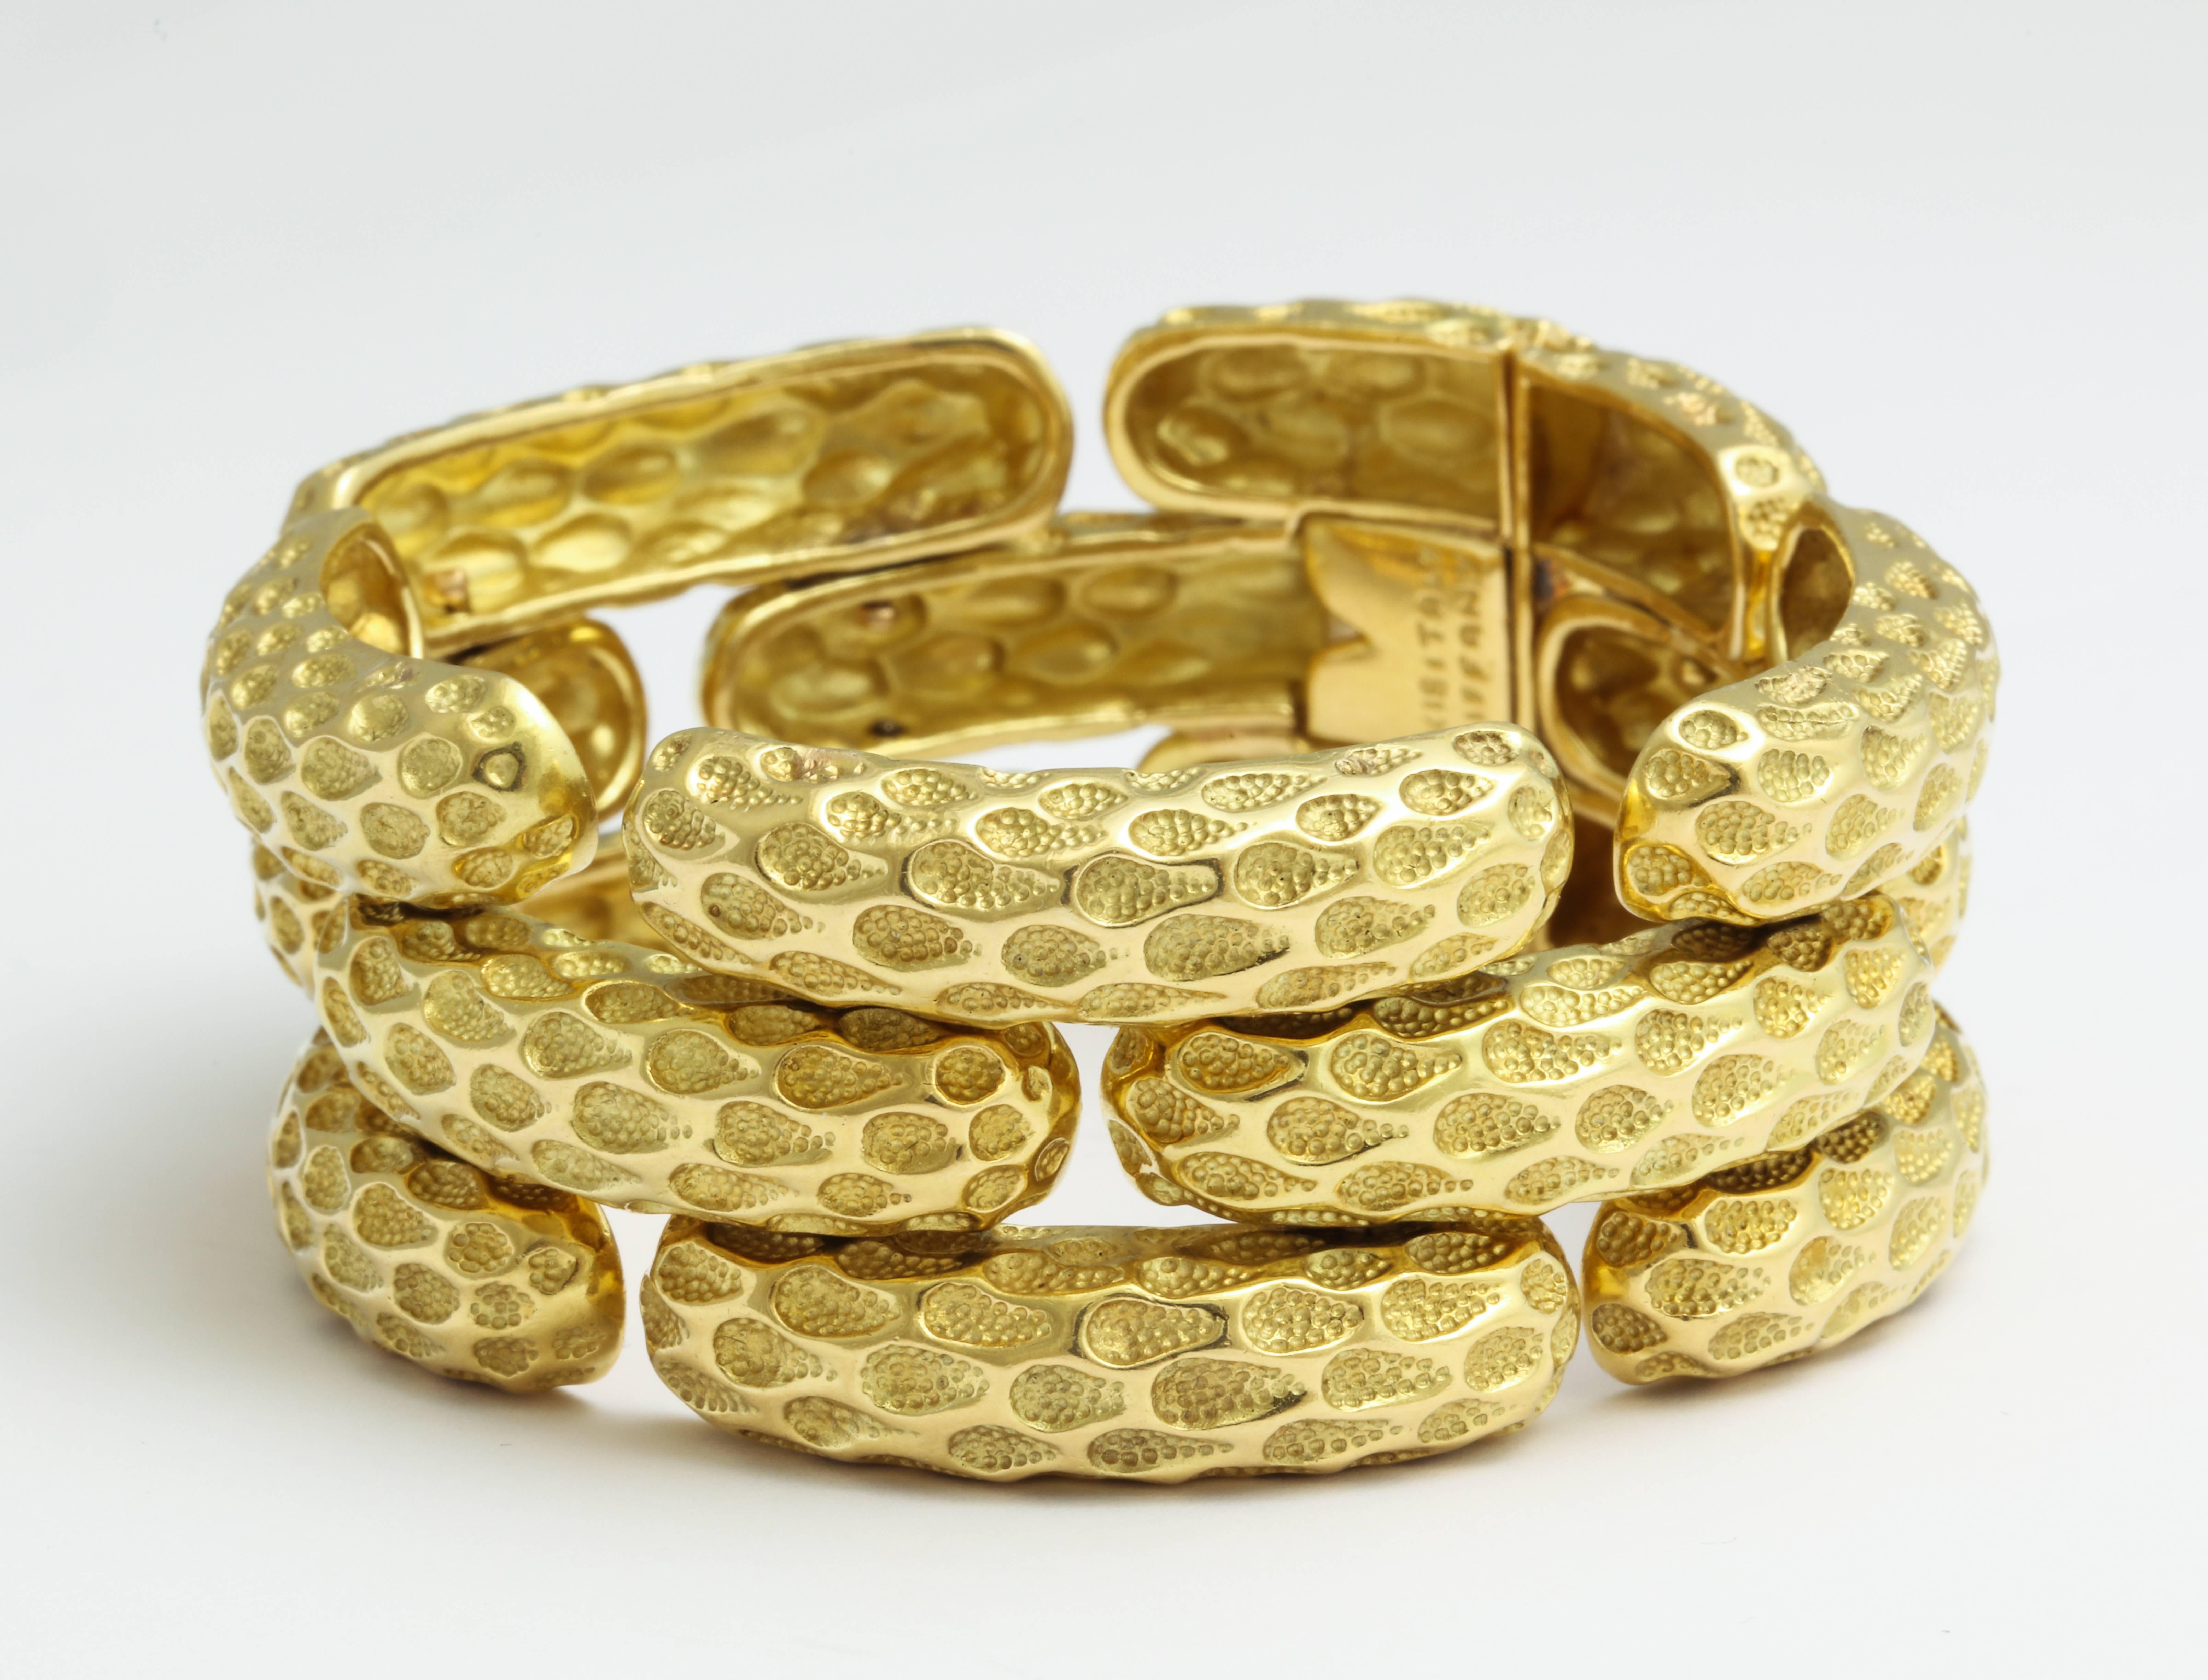 A smart and substantial 1970s Tiffany bracelet in 18K gold with a polished surface pattern replicating net, contrasted by hand applied texture deep in the recesses, all nicely articulated to be comfortably worn day into night. Marked Tiffany - Italy